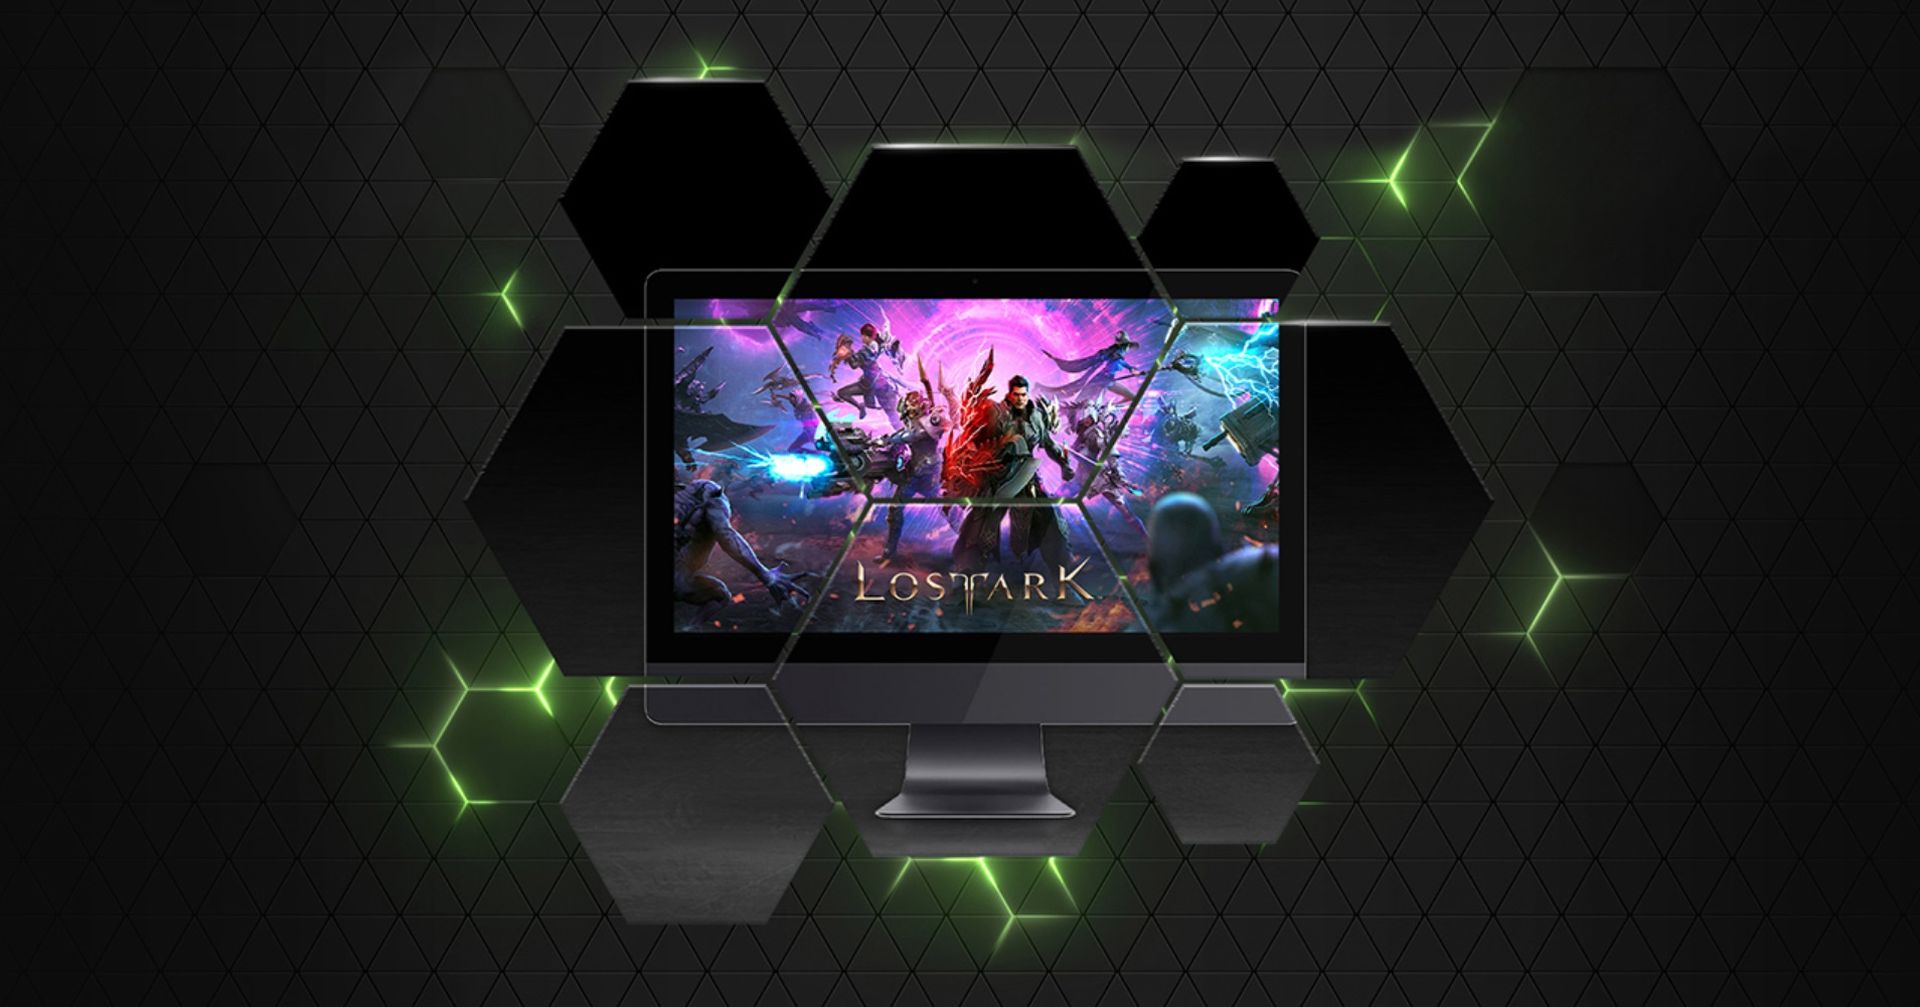 Finally long-awaited Geforce Now M1 support is now here with an update. Nvidia has revamped its GeForce Now cloud gaming service to support natively on a number of Apple M1-powered computers.